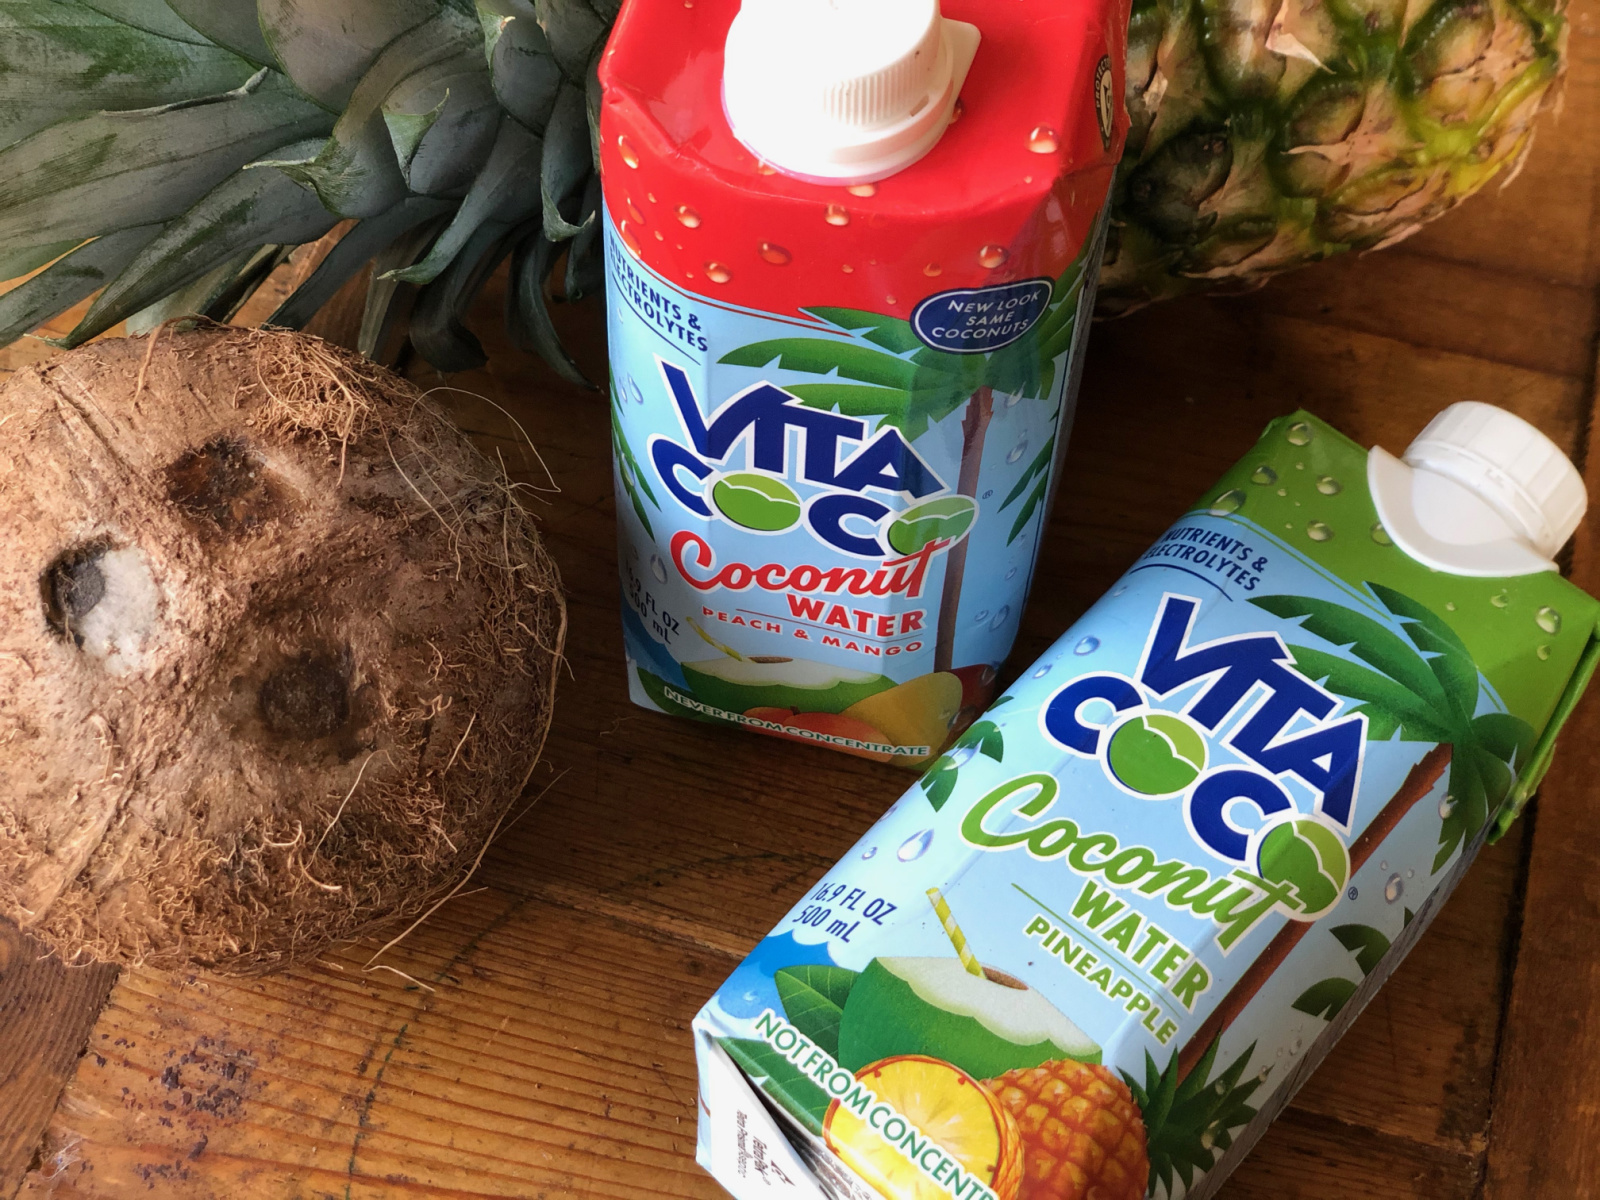 Vita Coco Coconut Water Is Just 99¢ At Kroger – Less Than Half Price